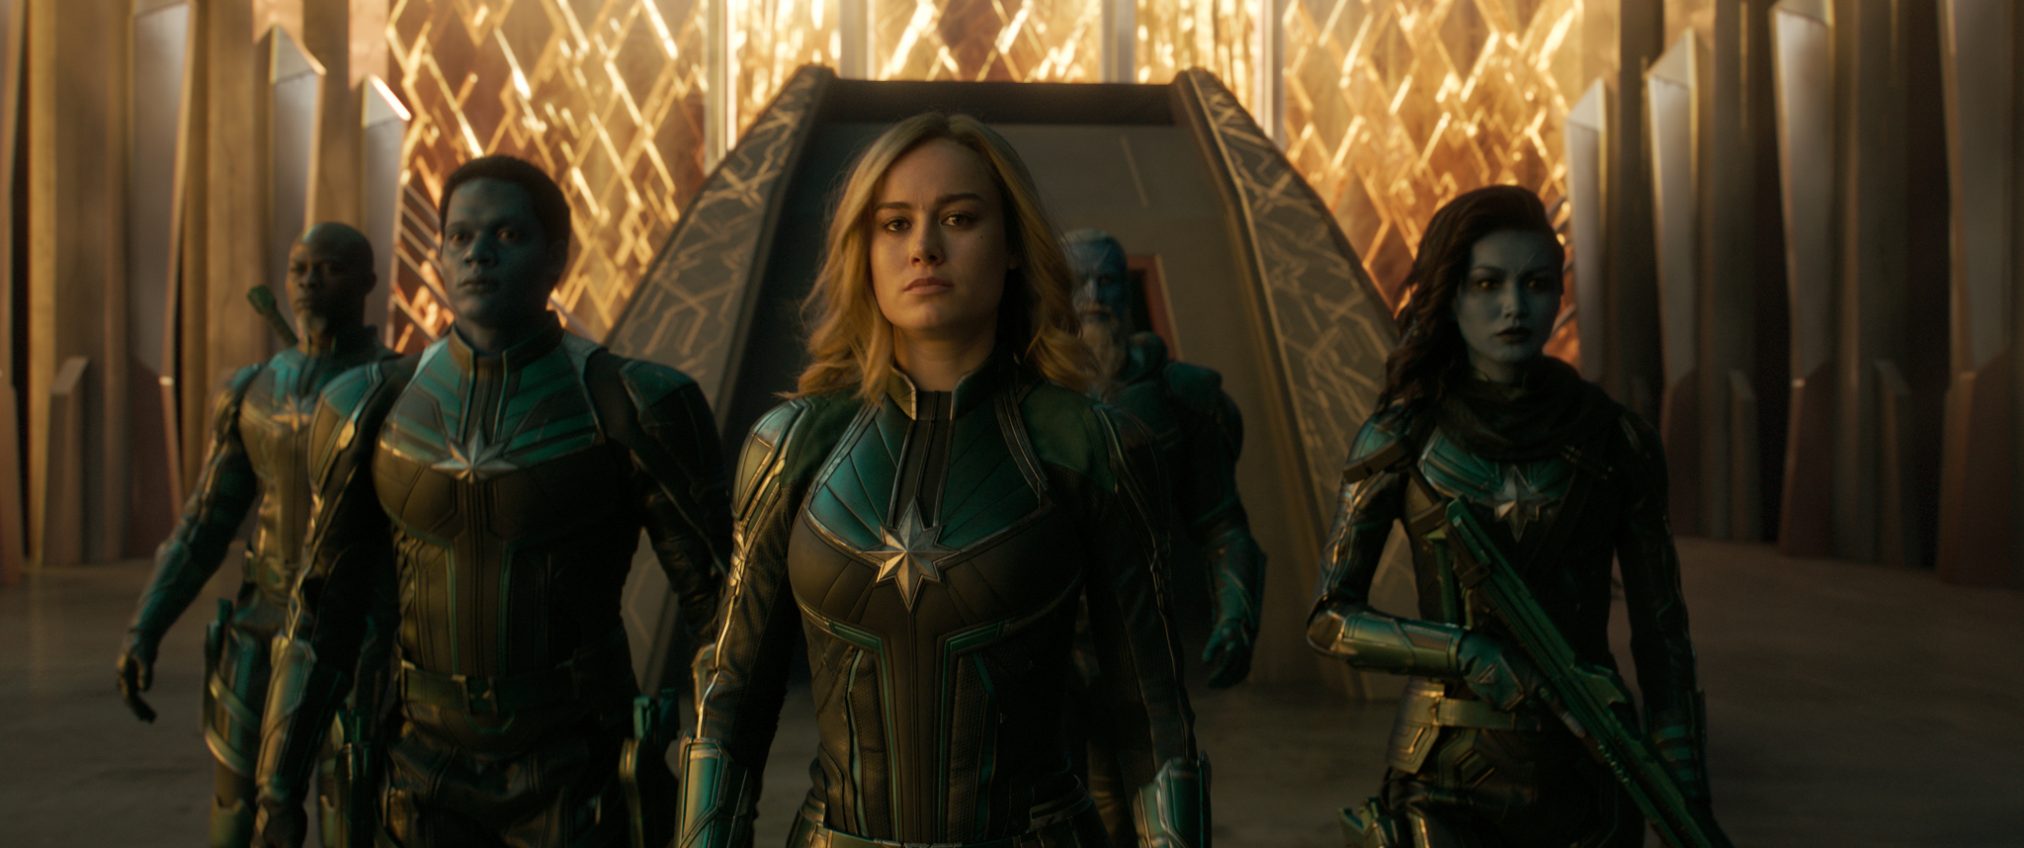 Captain Marvel is coming to Digital and Blu-Ray! Don't miss it! #CaptainMarvel